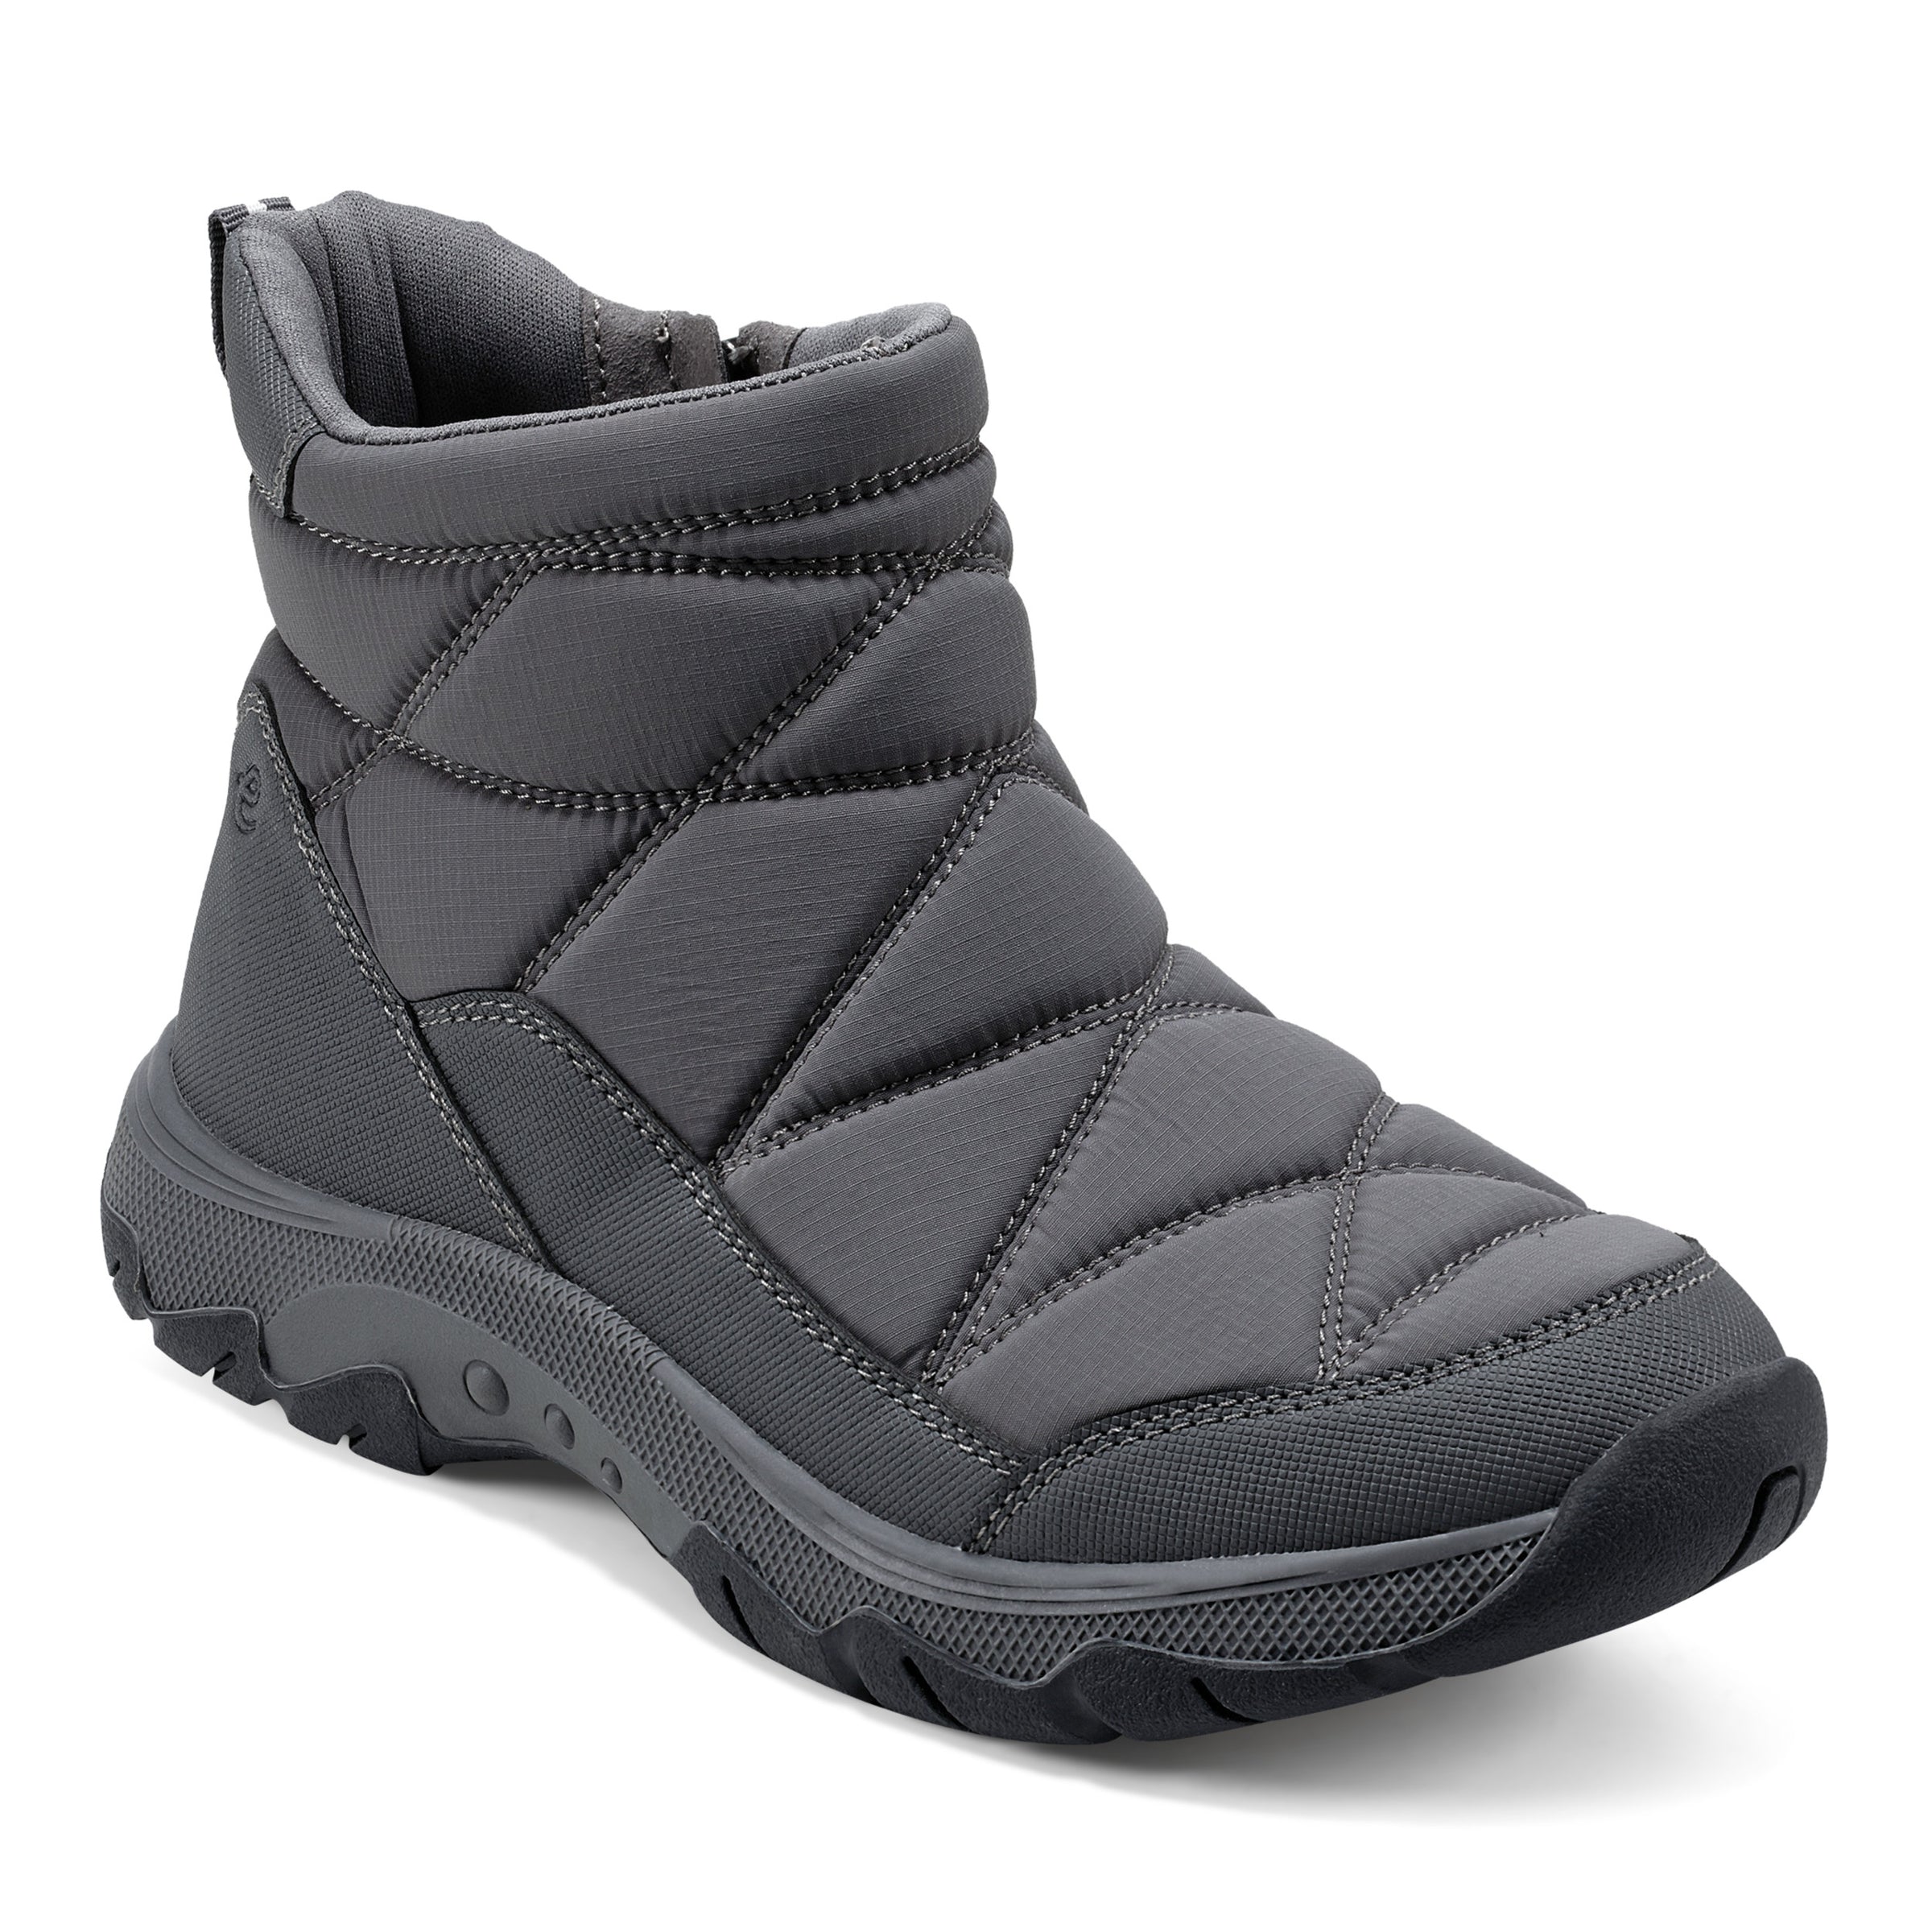 Tru ∽ Quilted Boot